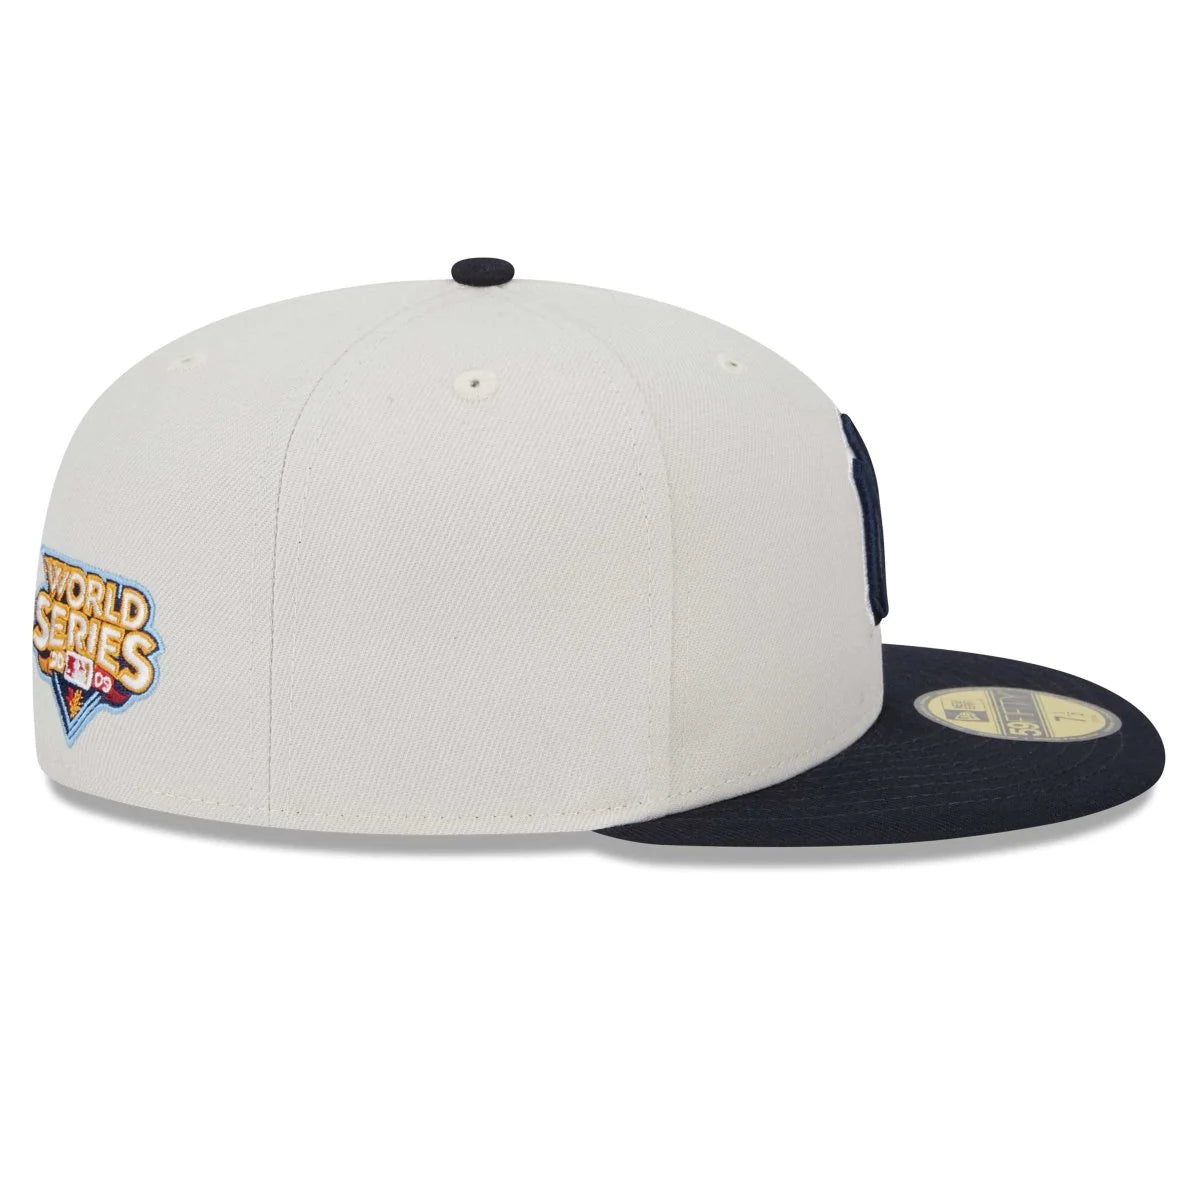 New Era - New York Yankees World Class Back Patch Fitted Hat - Gray/Navy